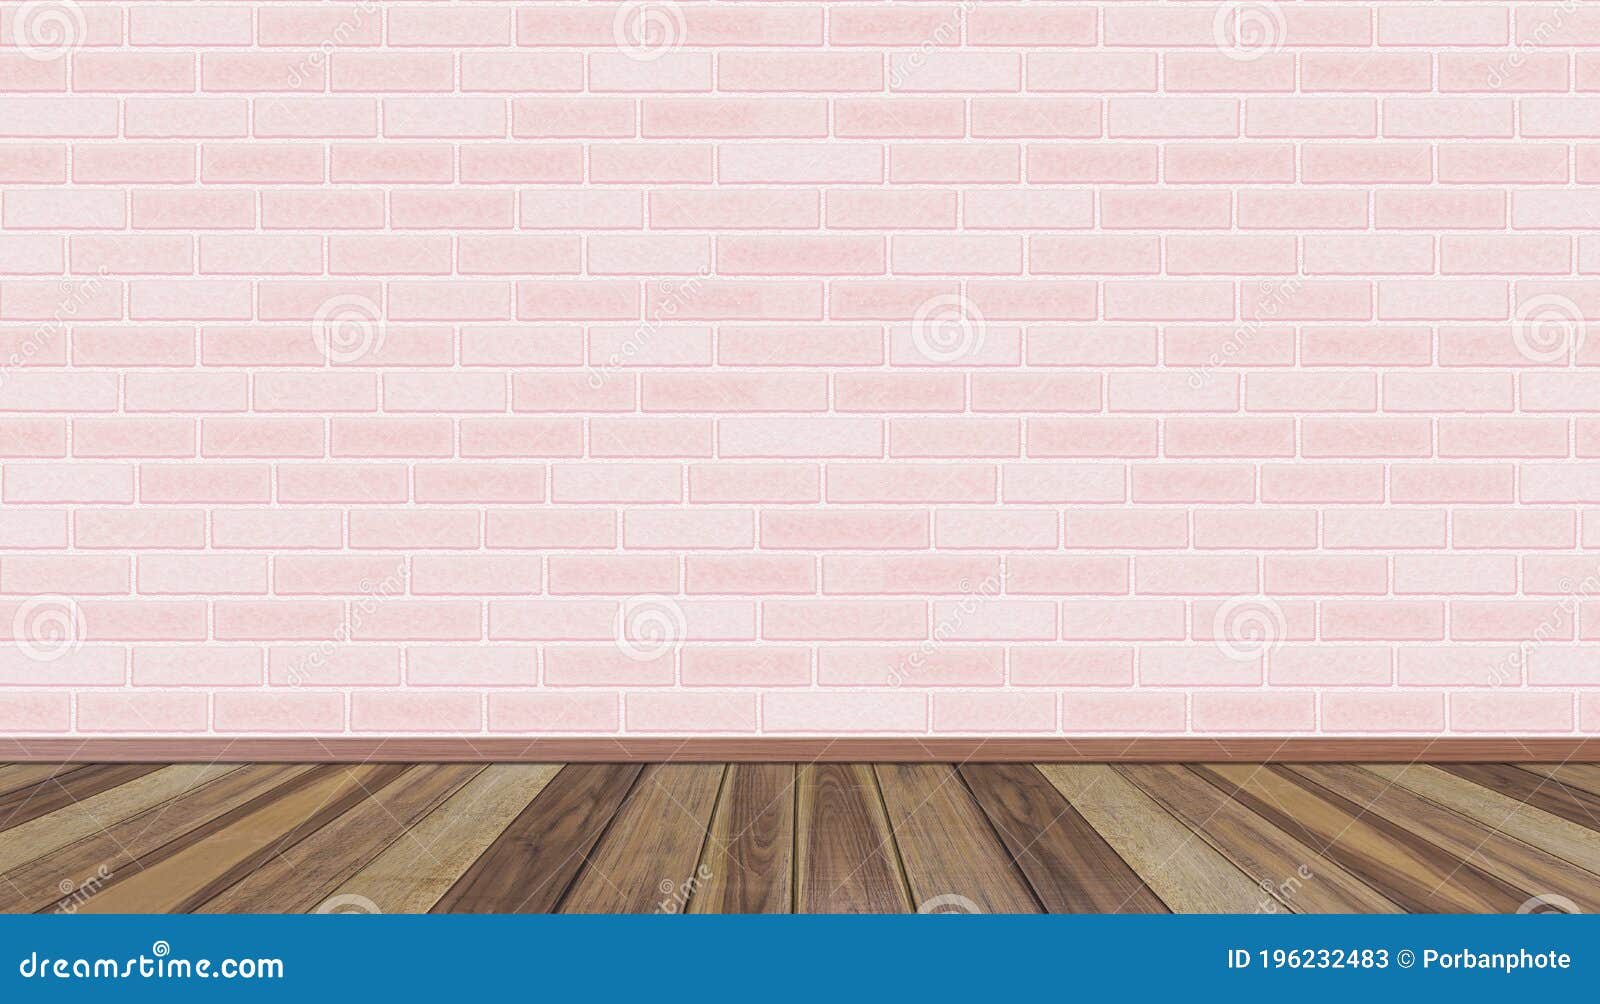 ale gerningsmanden cabriolet Empty Room with Pink Brick Wall Background and Wooden Floor. Stock Image -  Image of indoor, apartment: 196232483